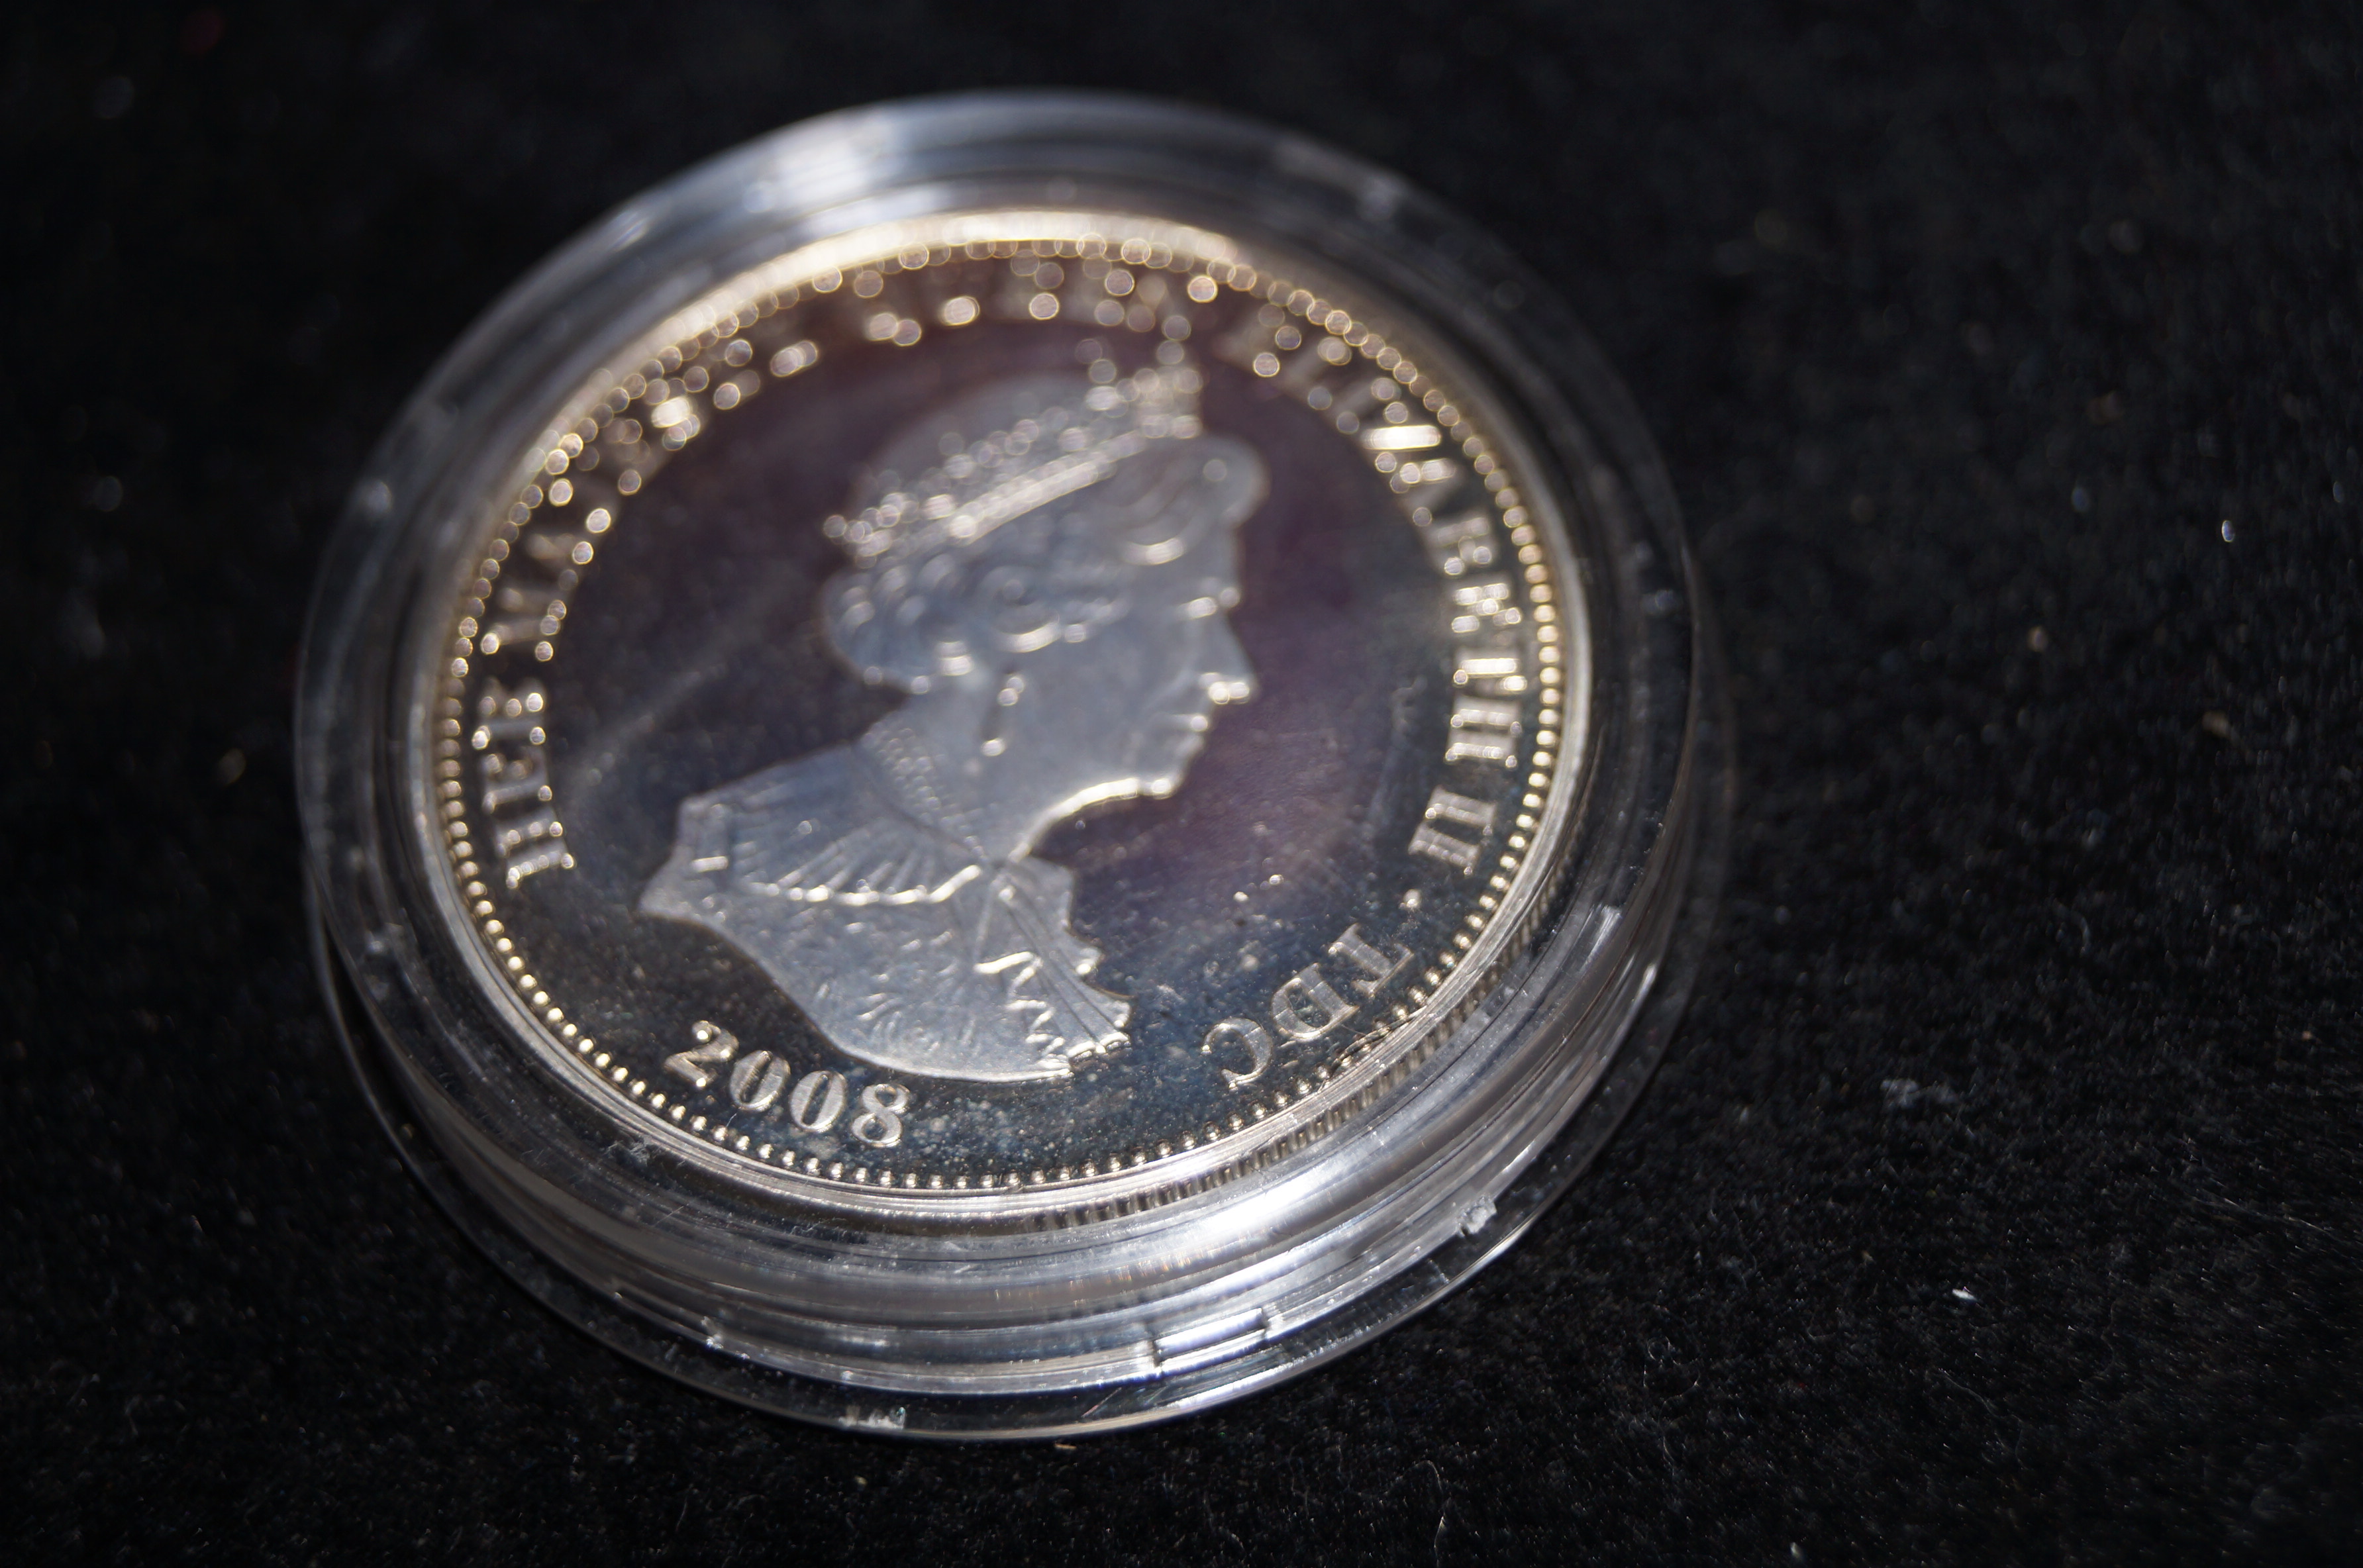 2008 £5 coin anniversary of the birth of Lord Nels